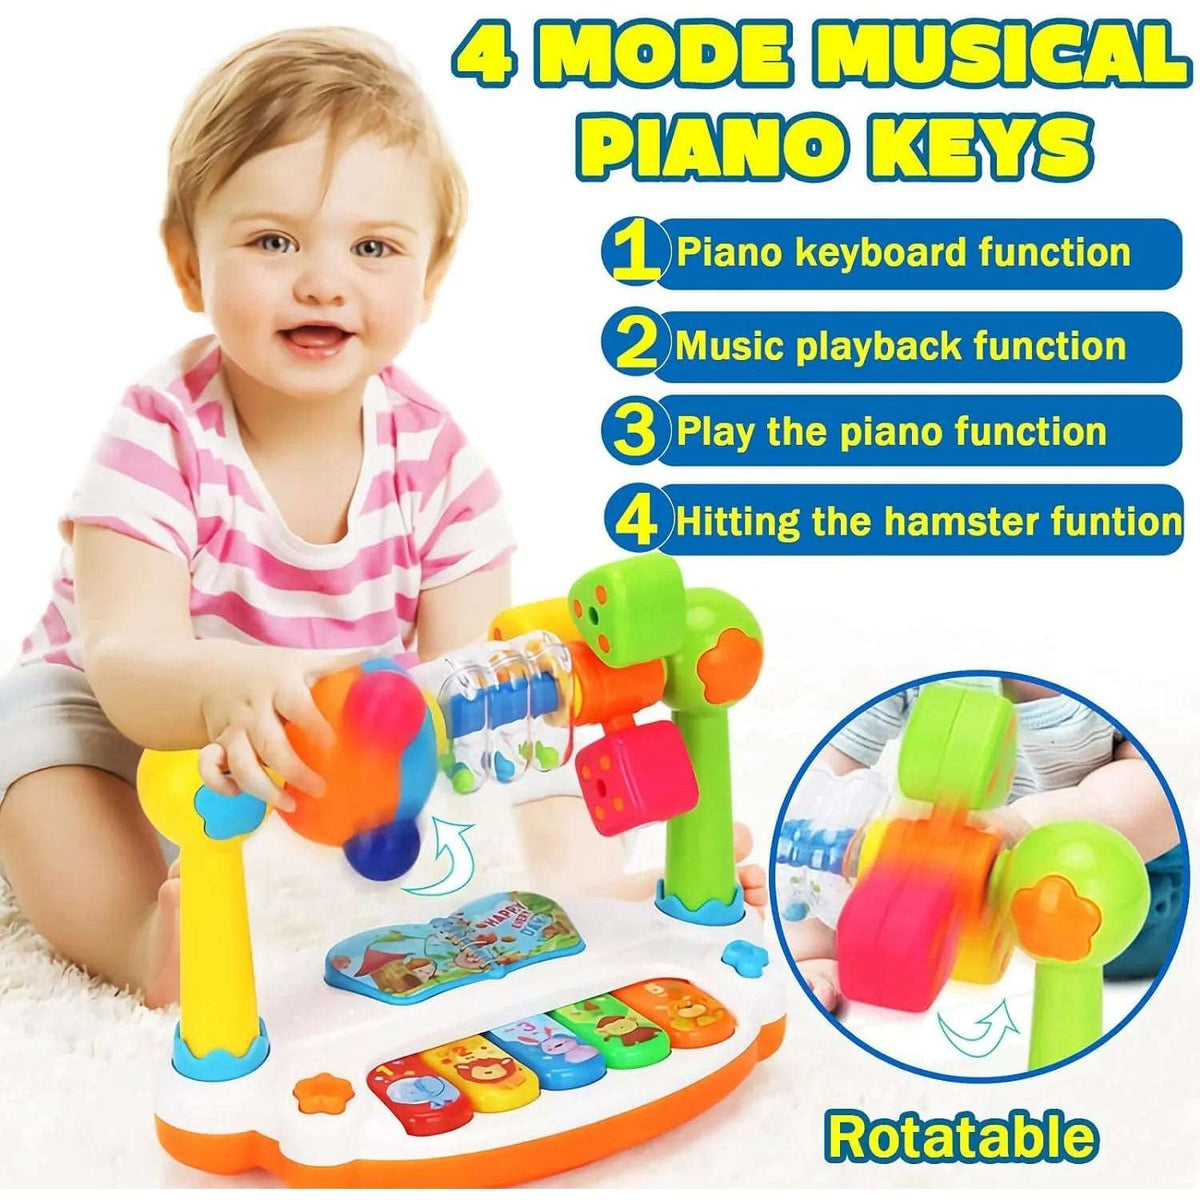 Baby Piano Toys Kids Rotating Music Piano Keyboard with Light Sound - Kids Musical Education